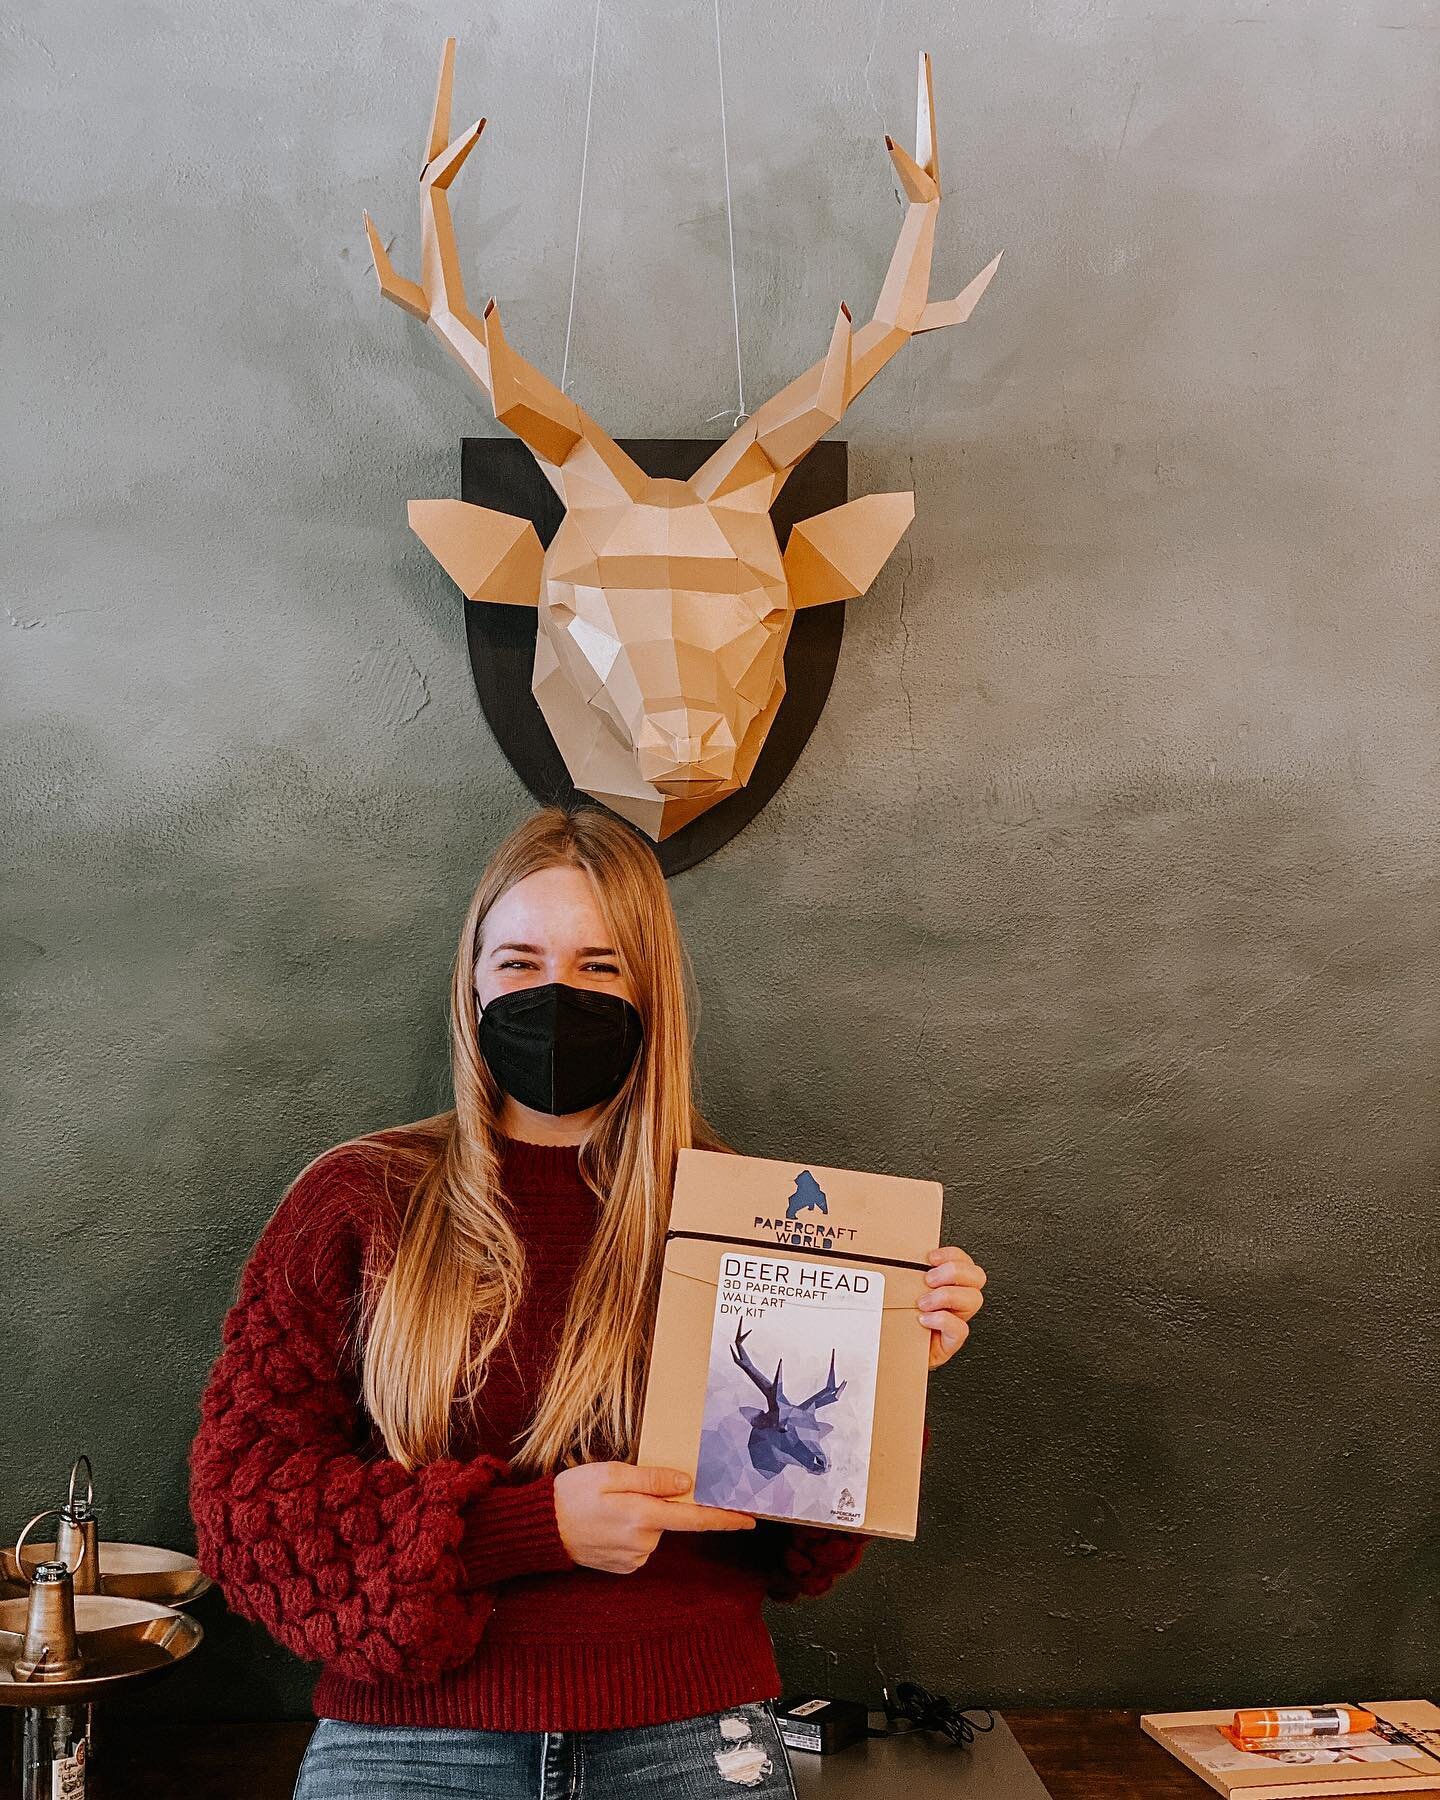 👩🏼&zwj;🎨 Gabrielle made our stag head 🦌, and now you can make your own too! Choose from elephant, sloth, bear, and more! 

#junipertreemarket